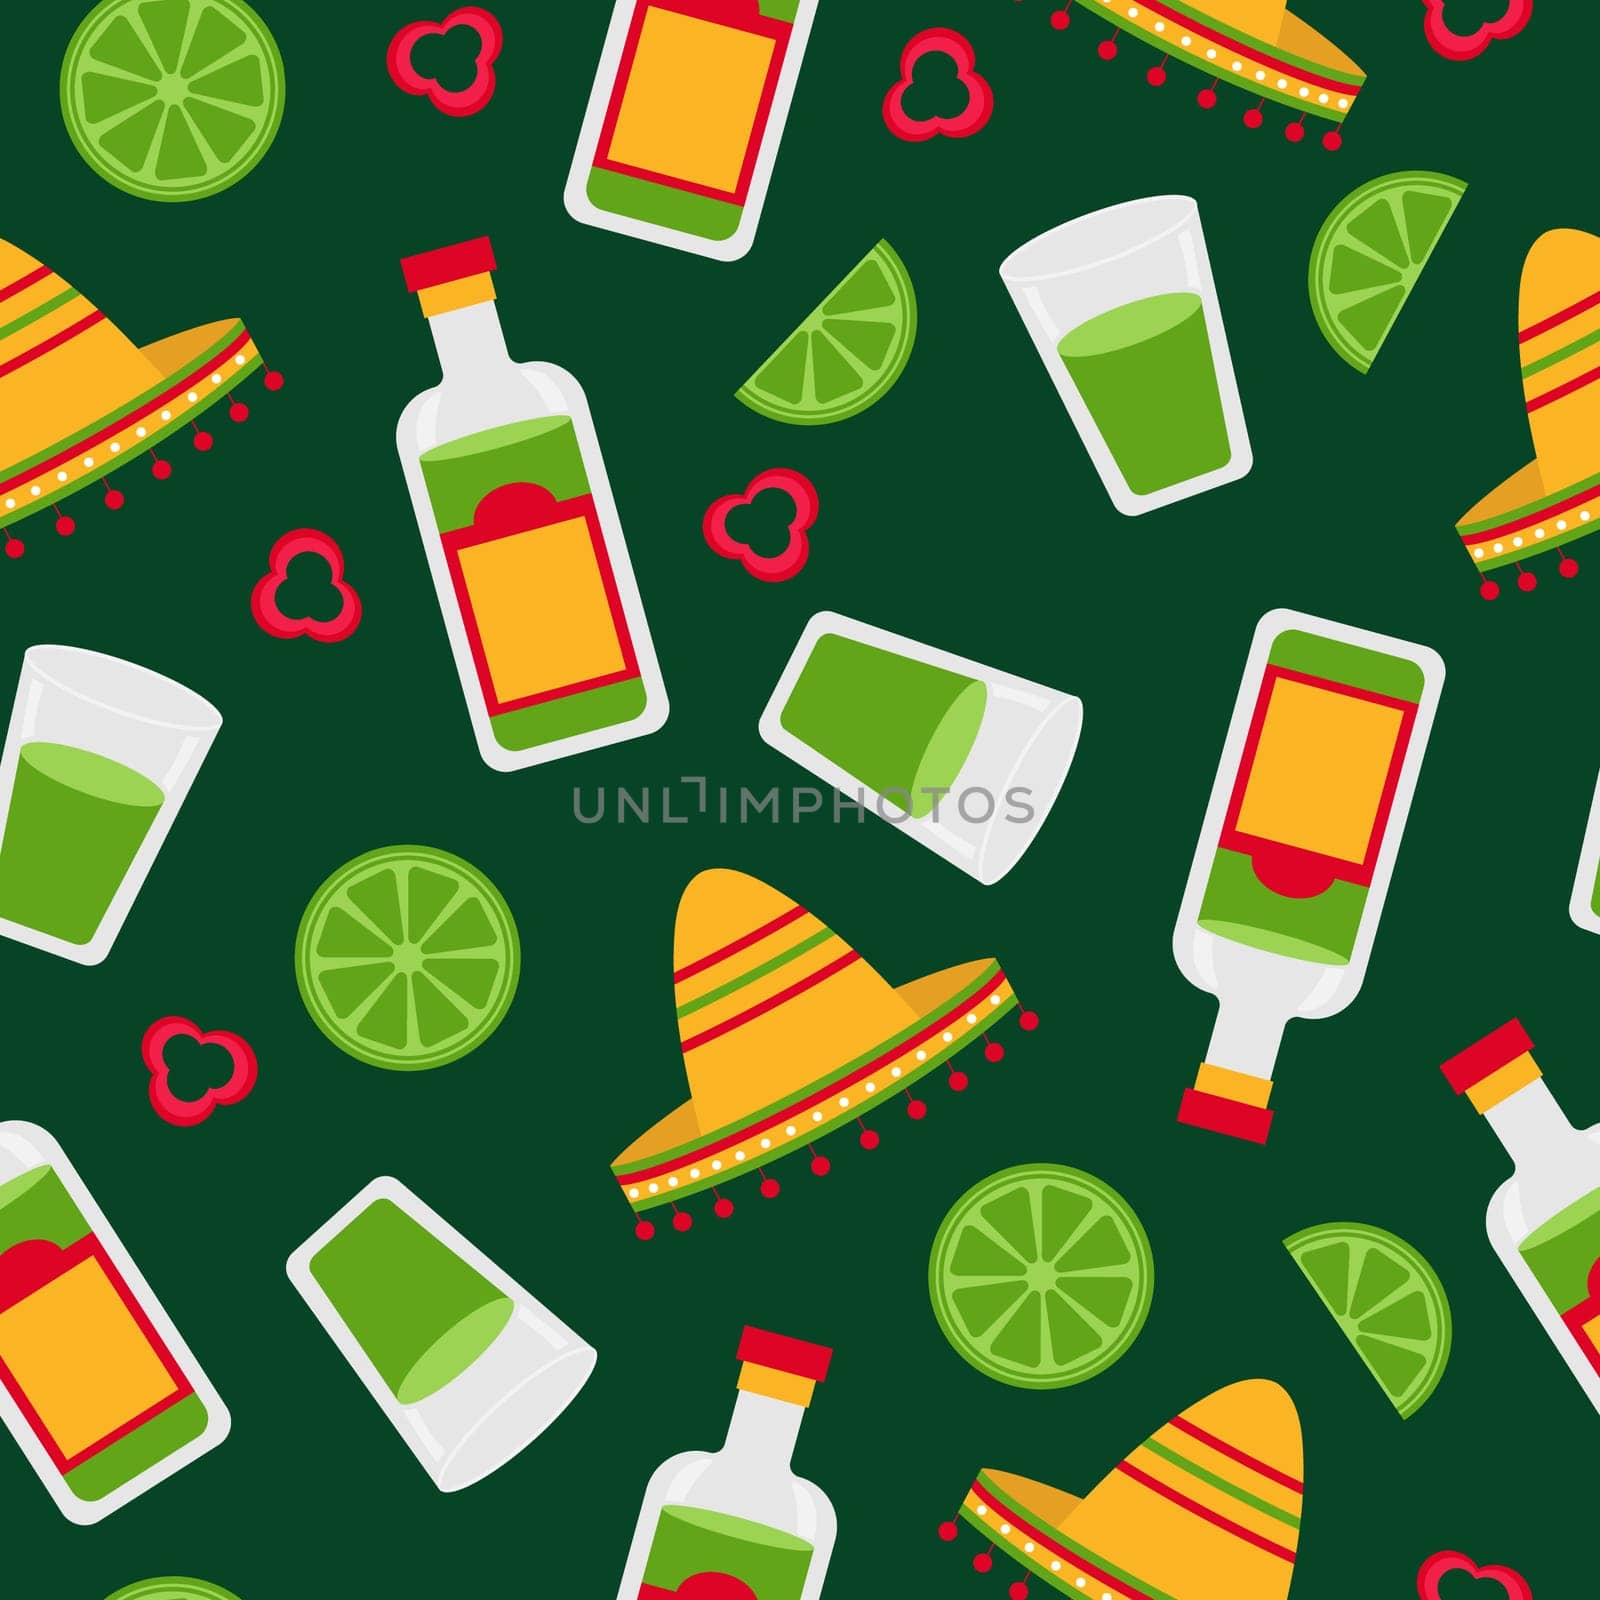 Colorful Mexican seamless pattern with tequila bottle, sombrero, chili pepper, lime shot, vector illustration. Pattern for wrapping, textile, design